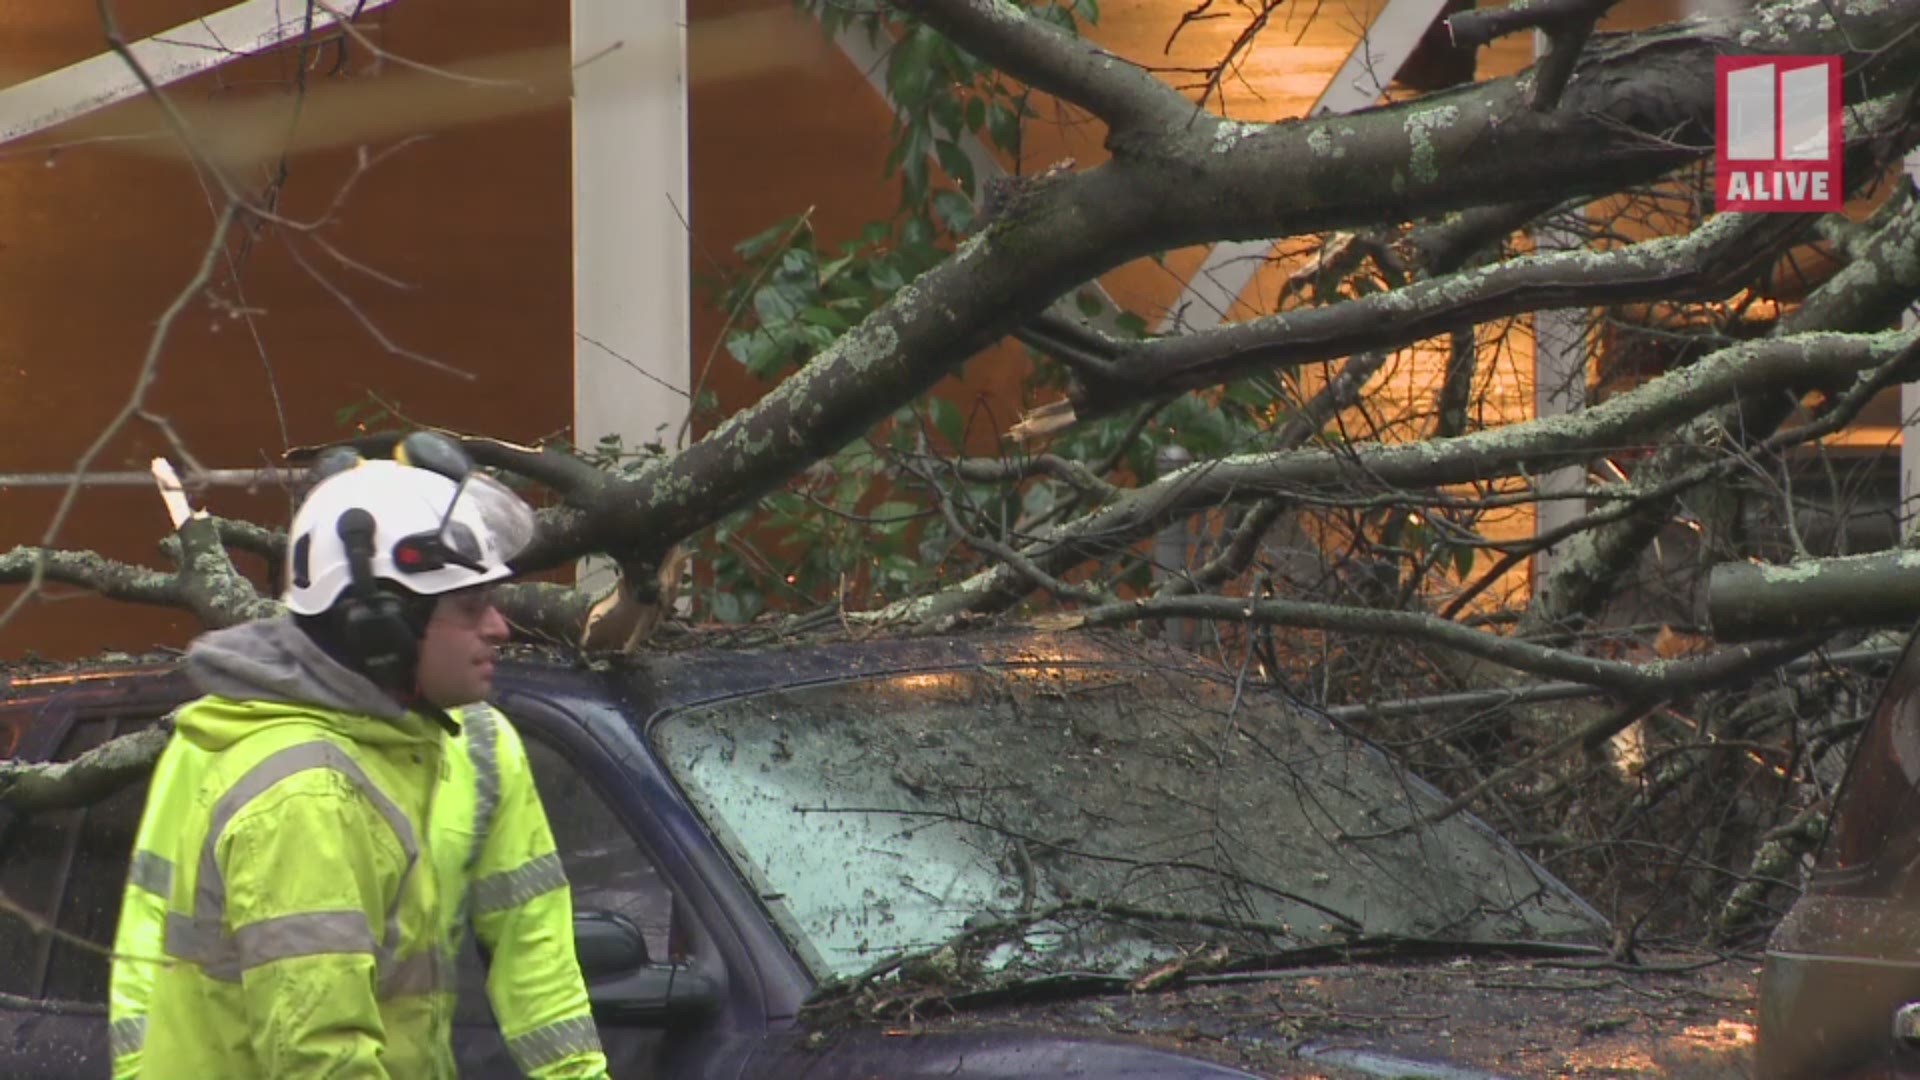 Officials said six cars were damaged or blocked by fallen trees Wednesday morning at an Emory University parking deck. No injuries were reported.